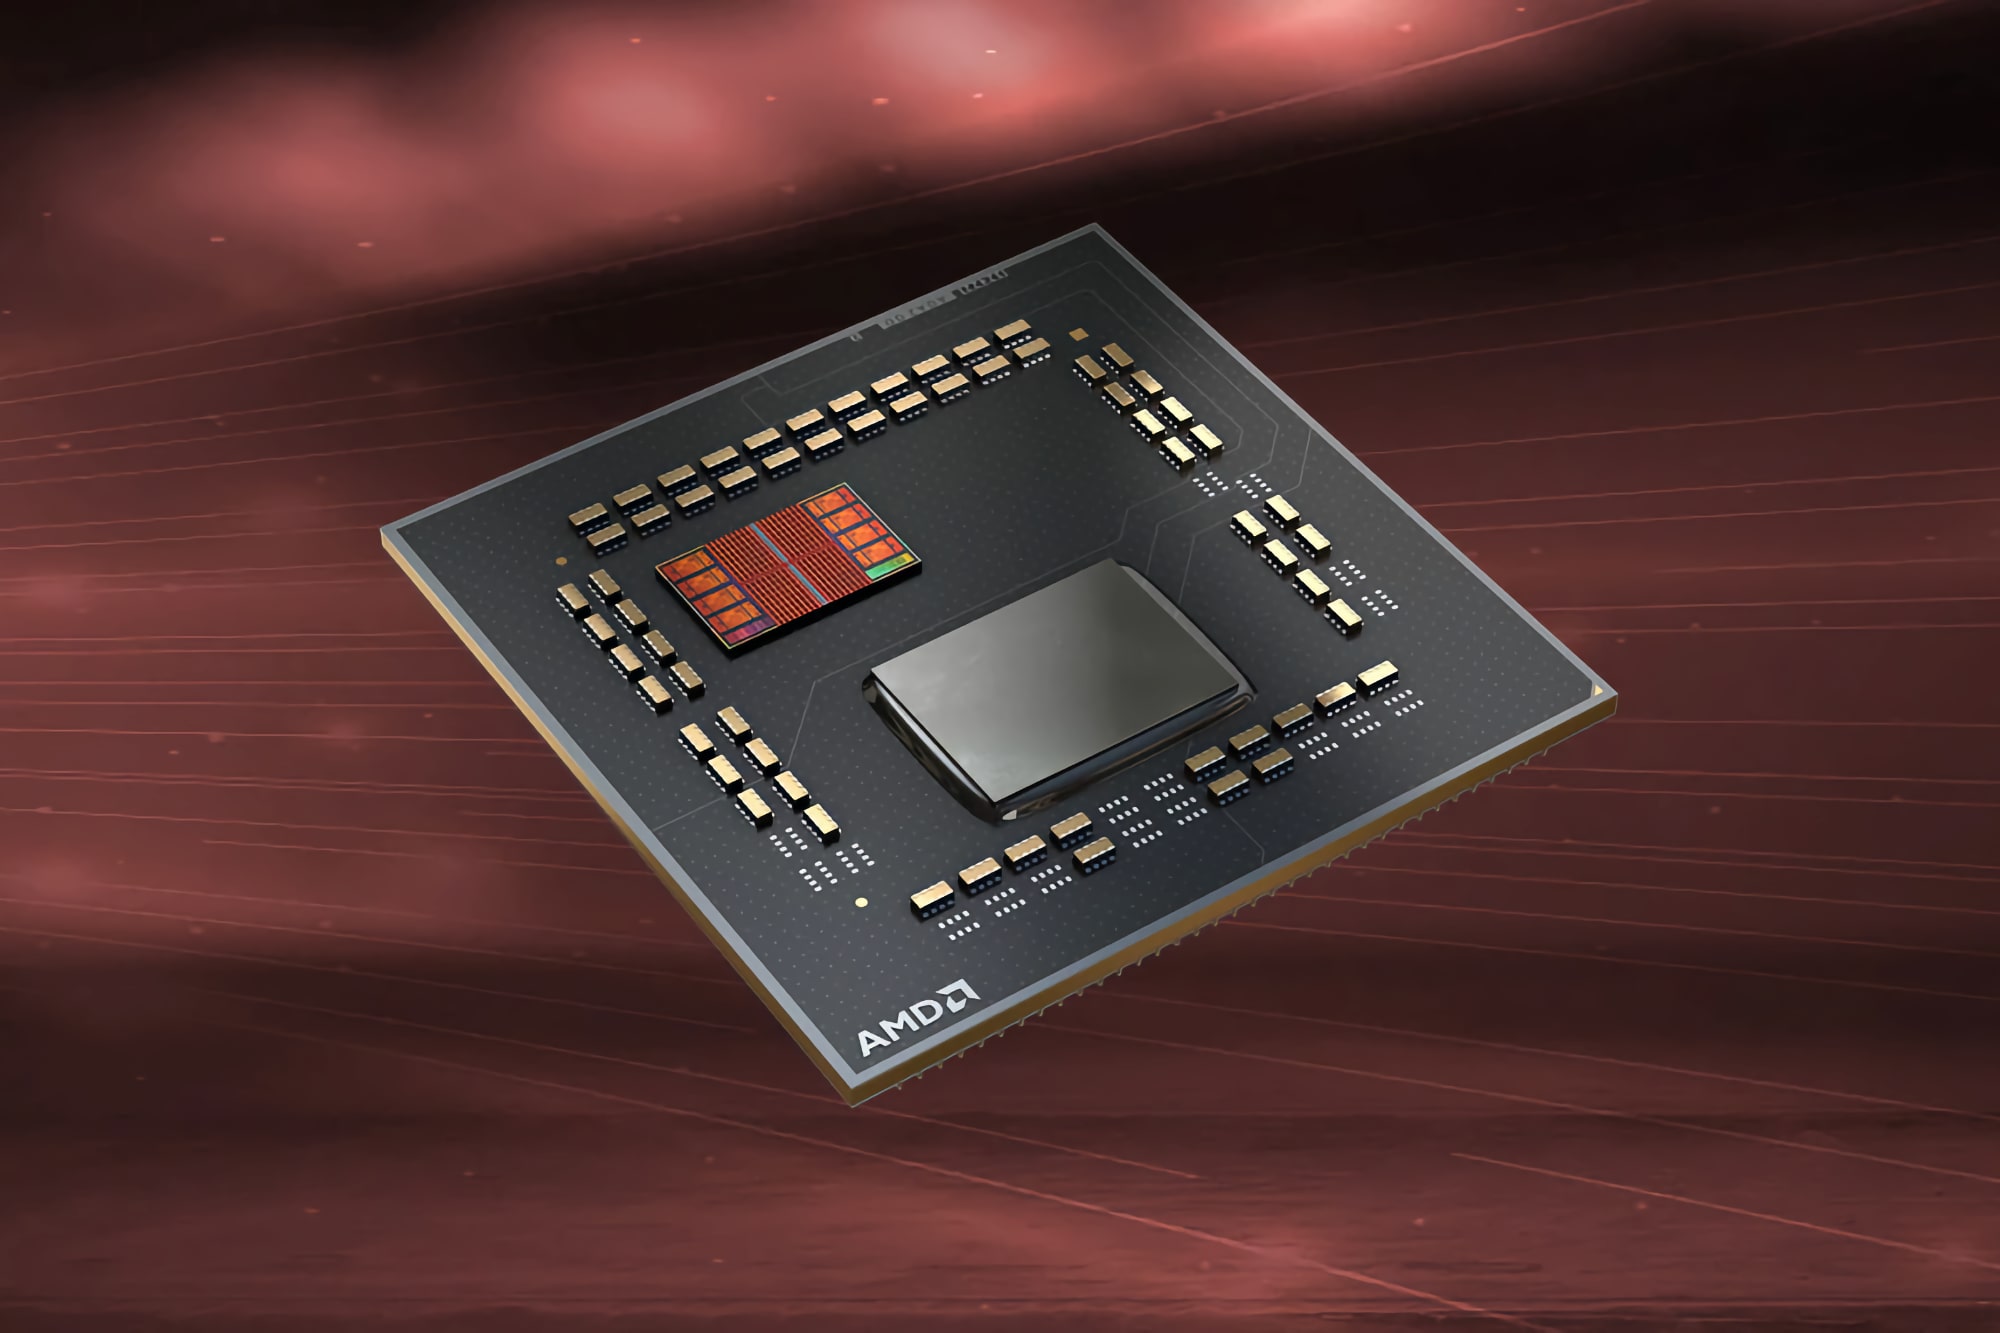 AMD 3D V-Cache chip is shown over a coppery background.